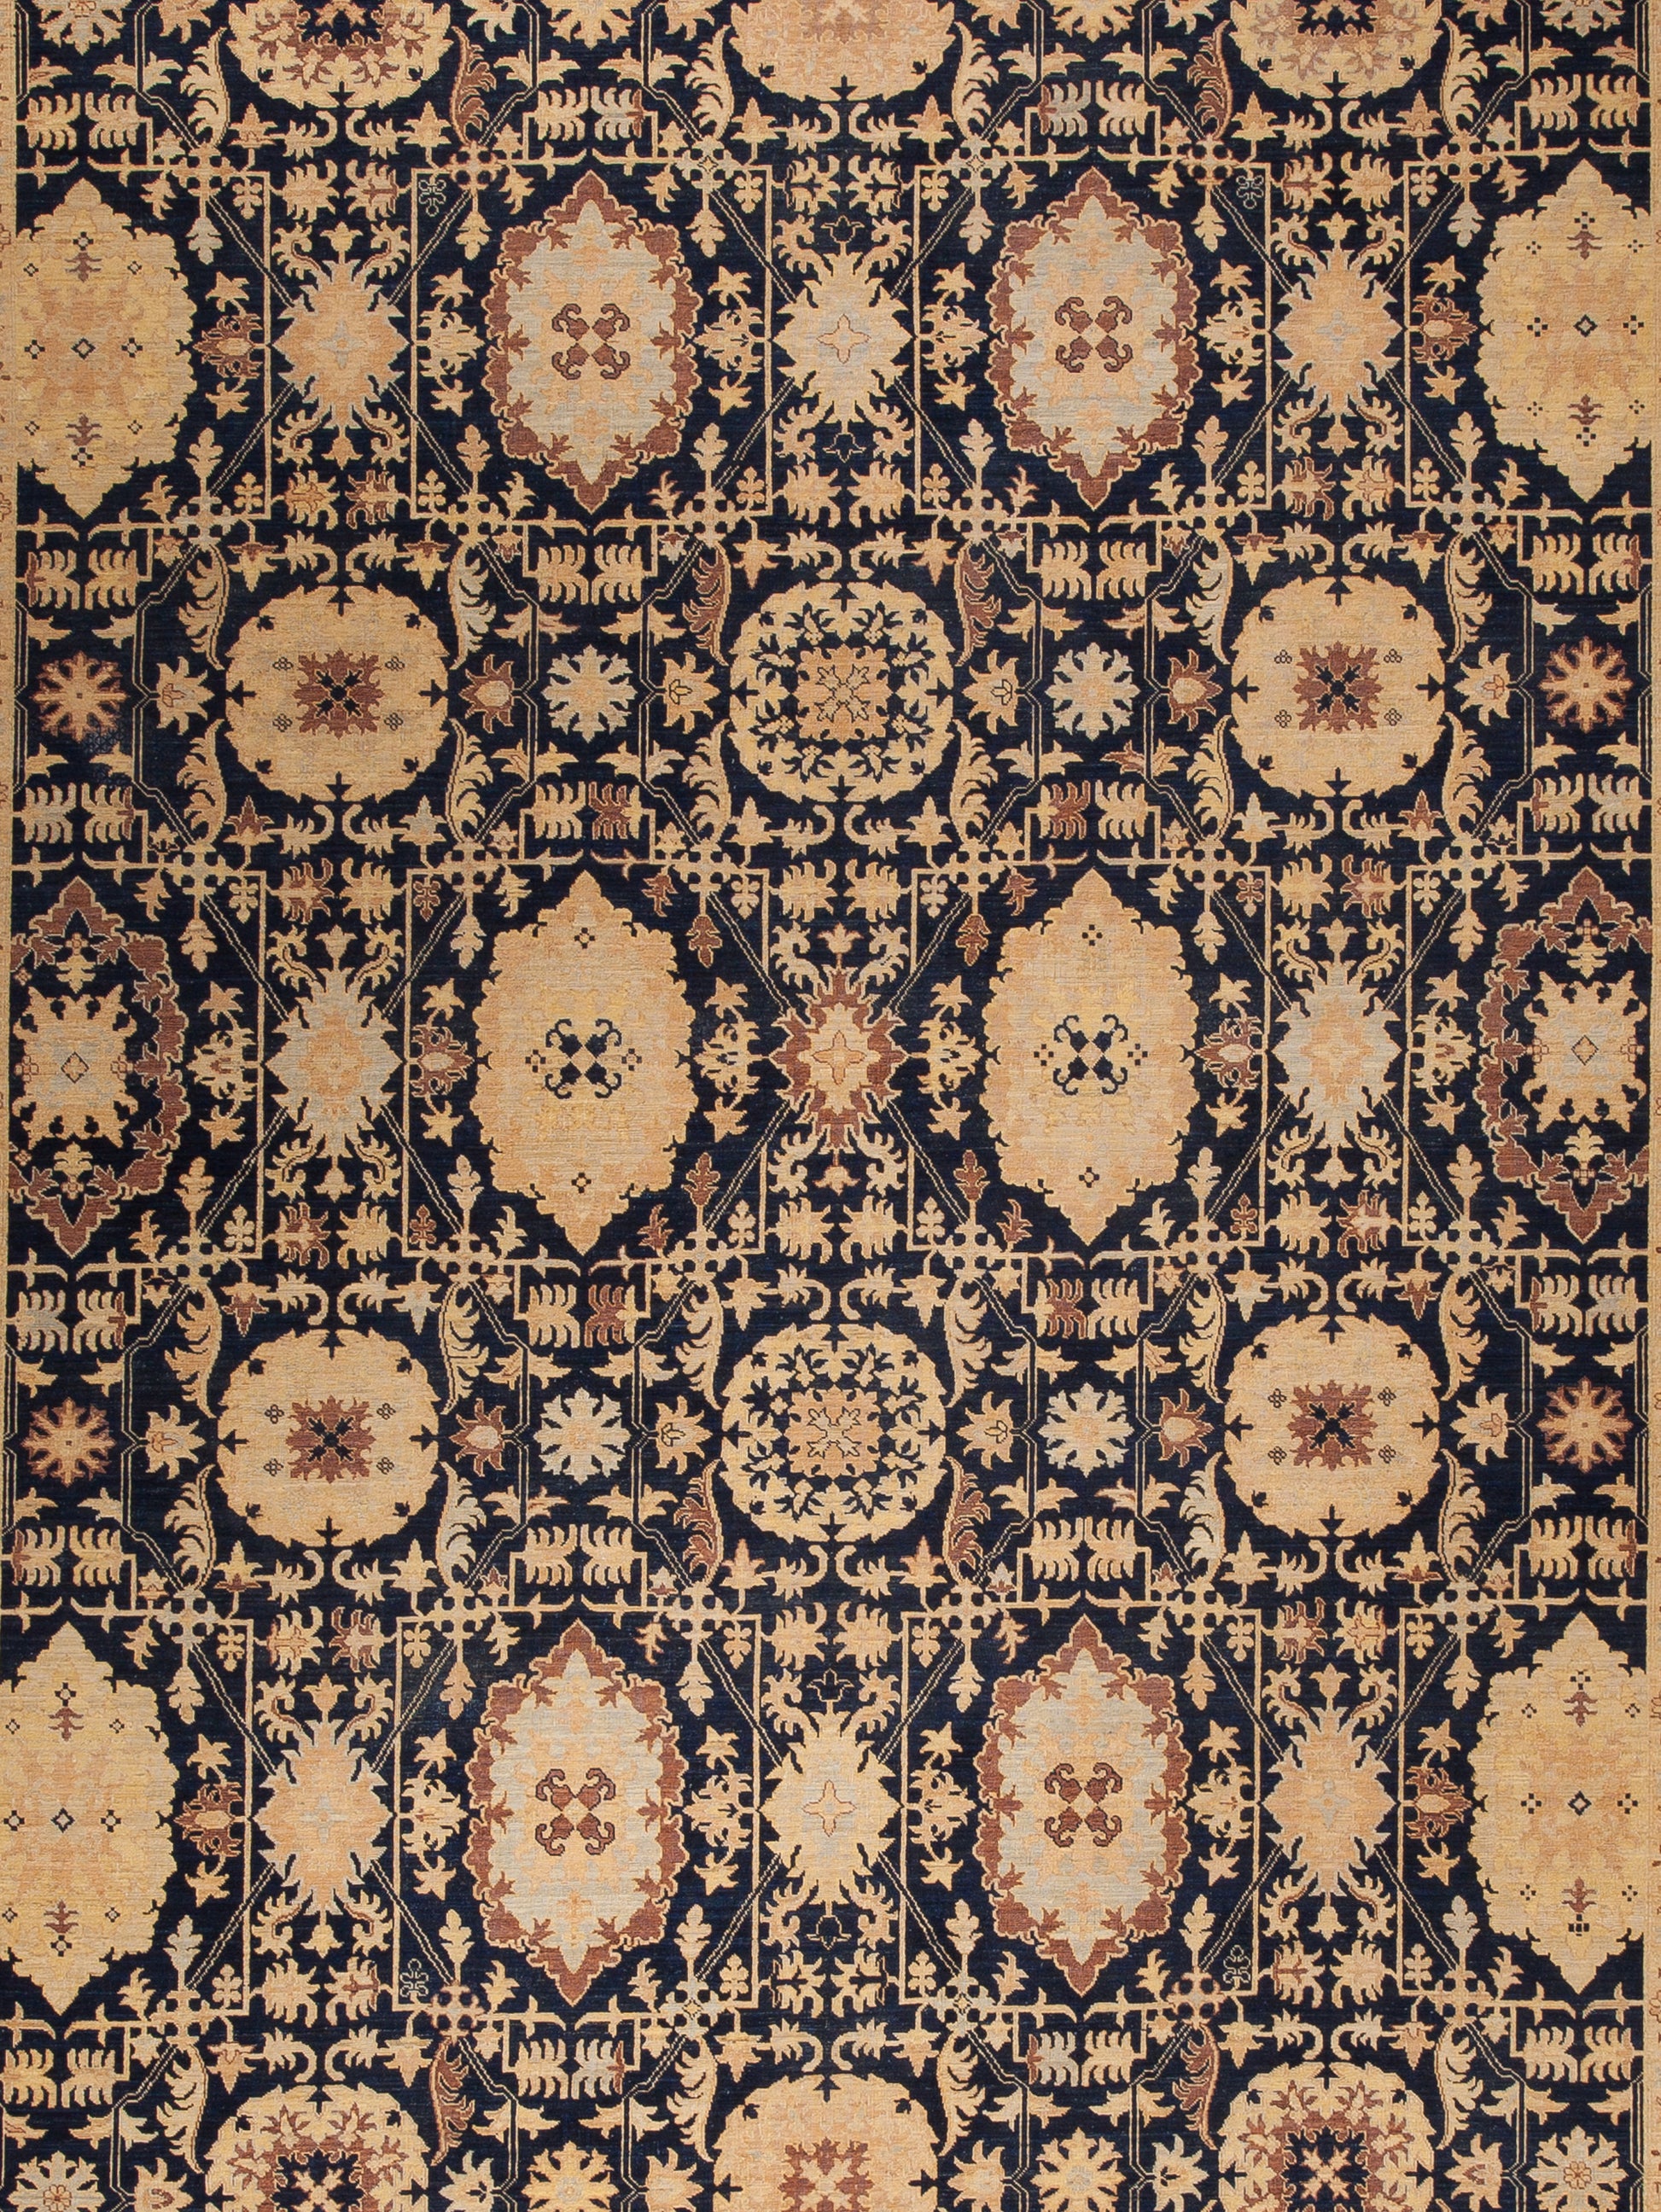 Finally, abstract leaves, swords, pine trees and more flaming shapes are featured in the center of the rug in a crowded pattern and all arranged symmetrically. 